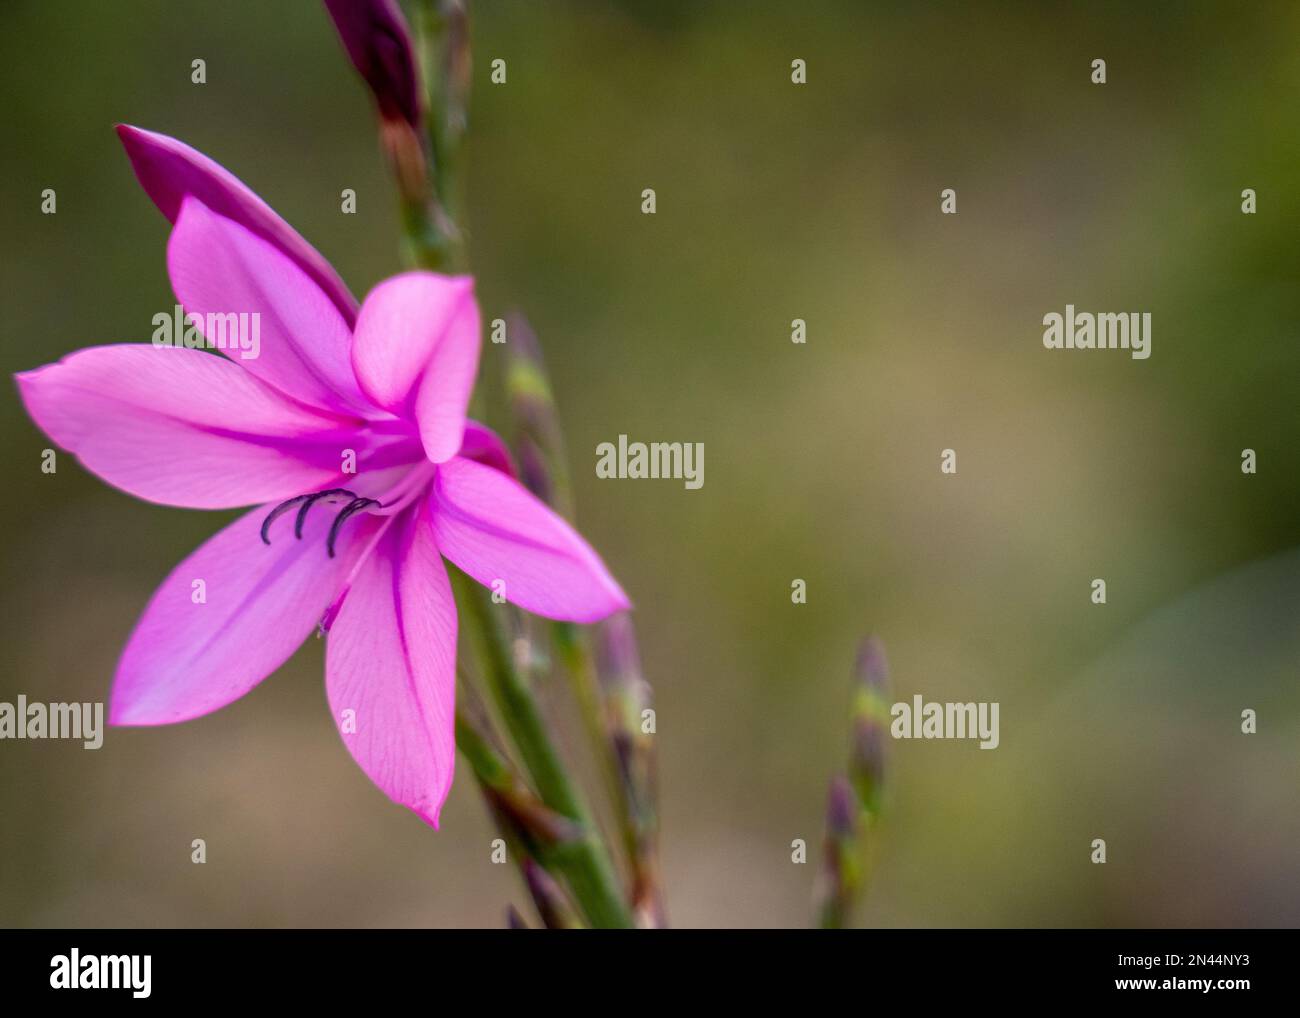 A selective focus of pink Watsonia flower with blurred background Stock Photo